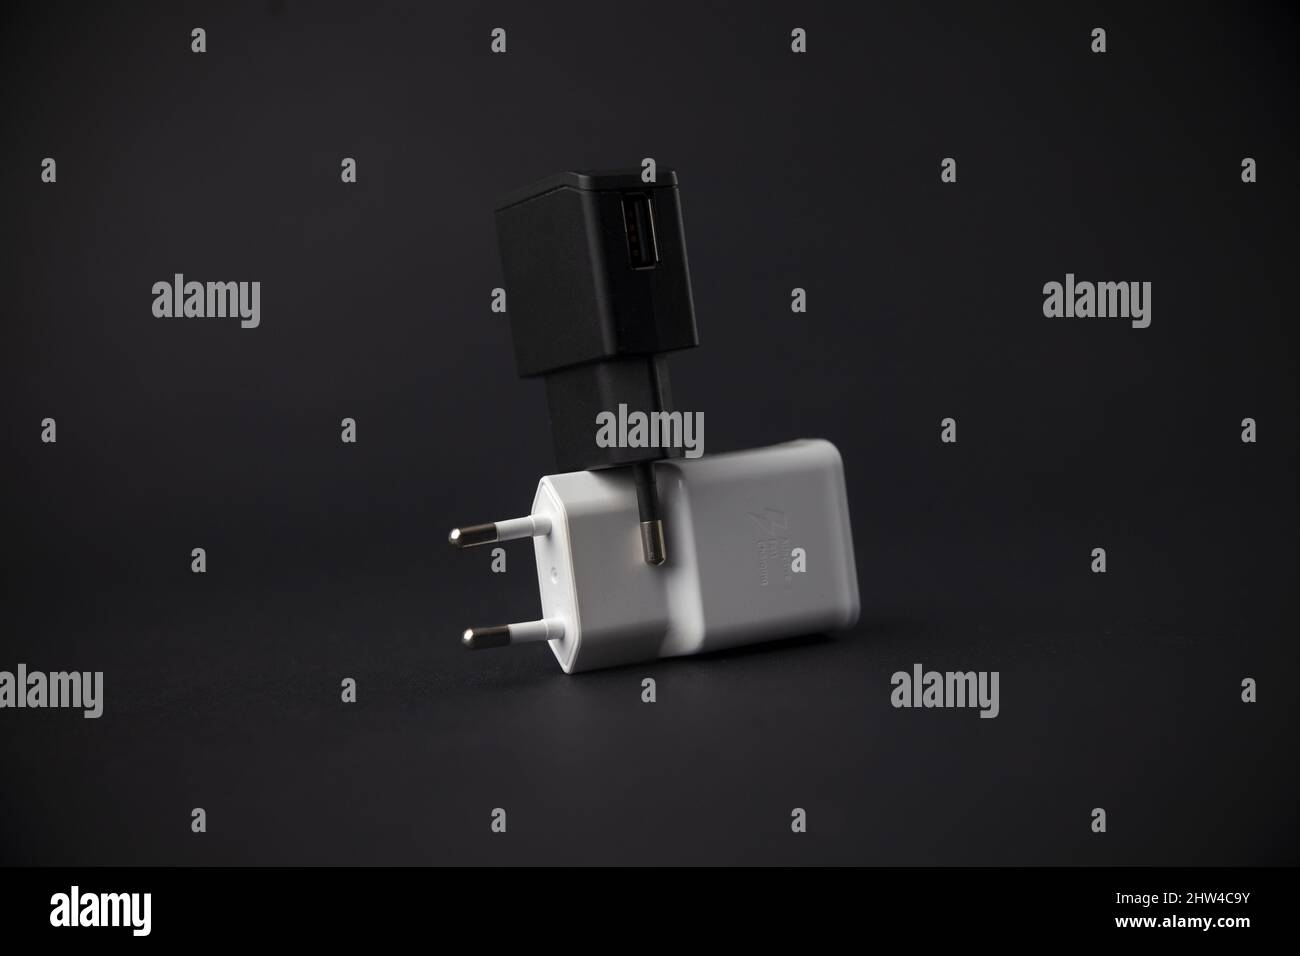 black and white mobile phone charger against each other, close up Stock Photo